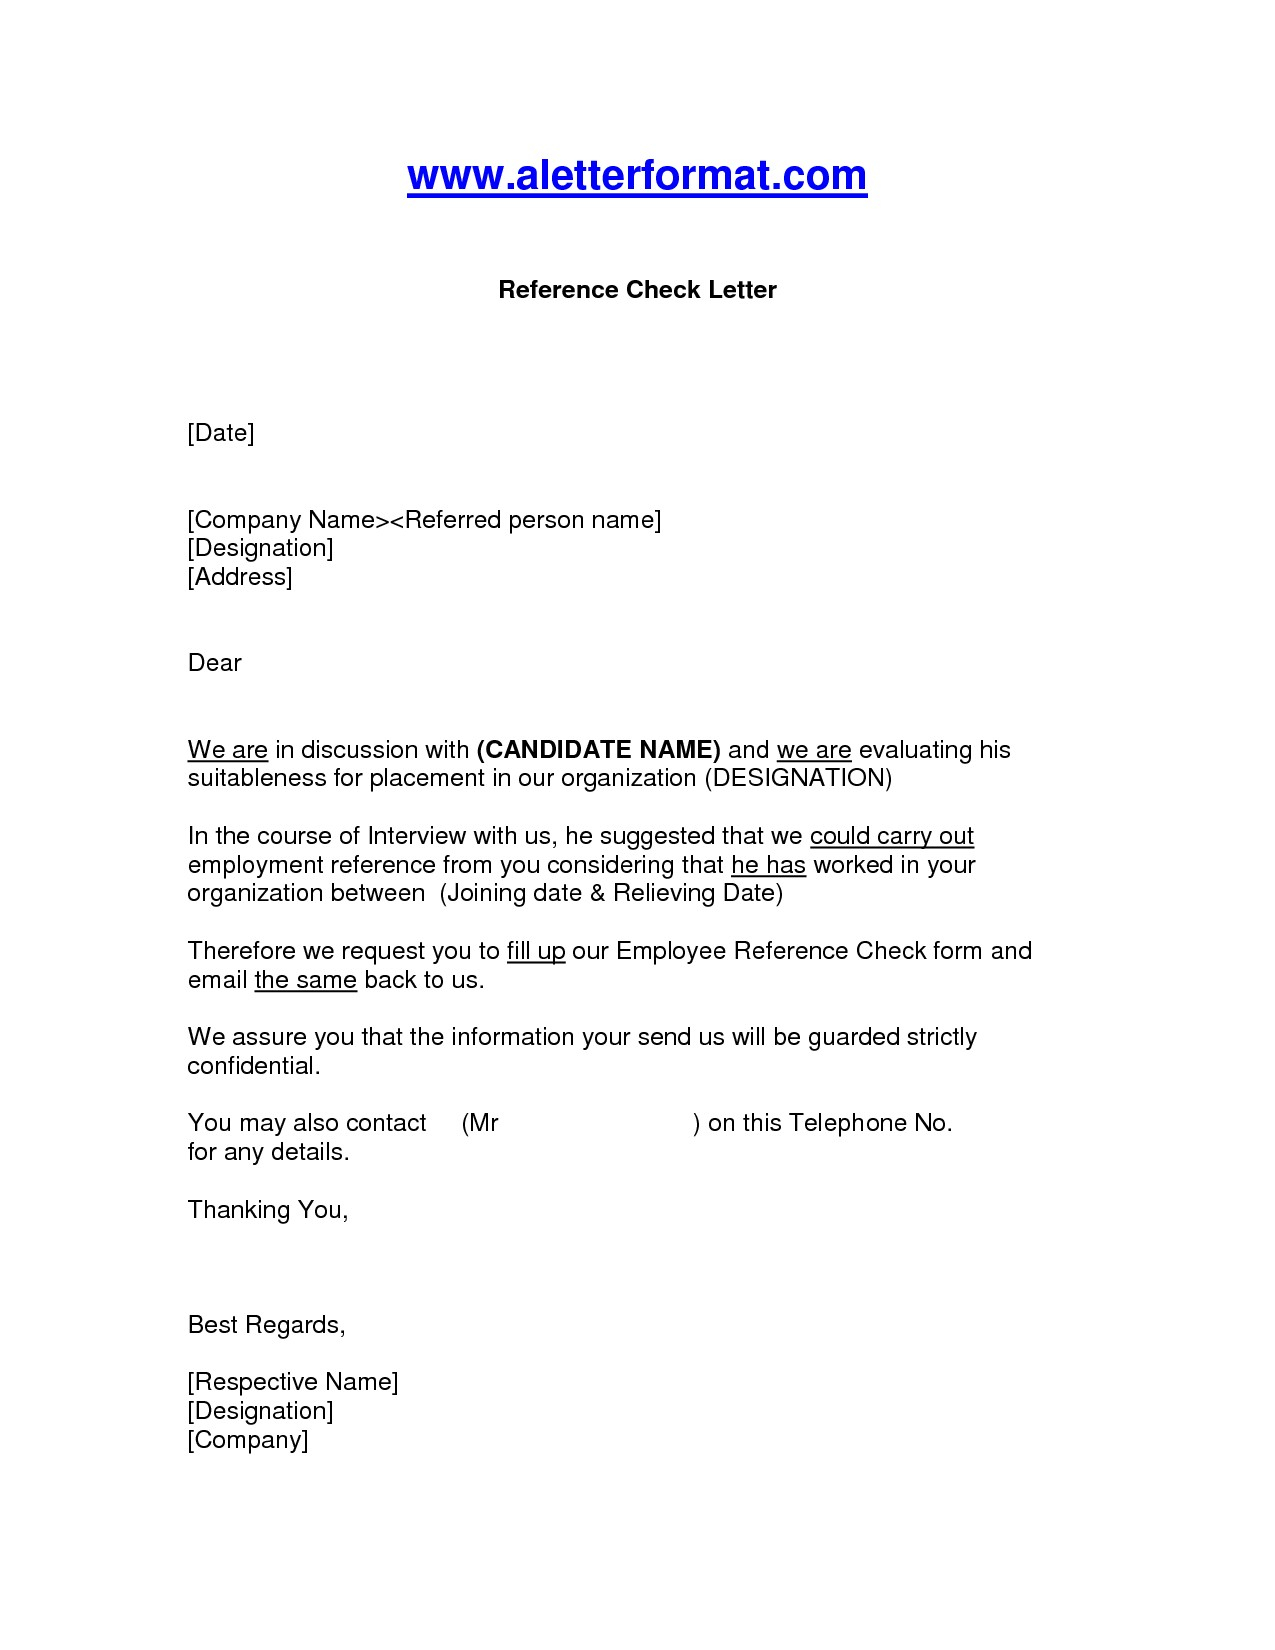 Business Referral Letter Template - Business Reference Letter Example Gallery Letter format formal Sample